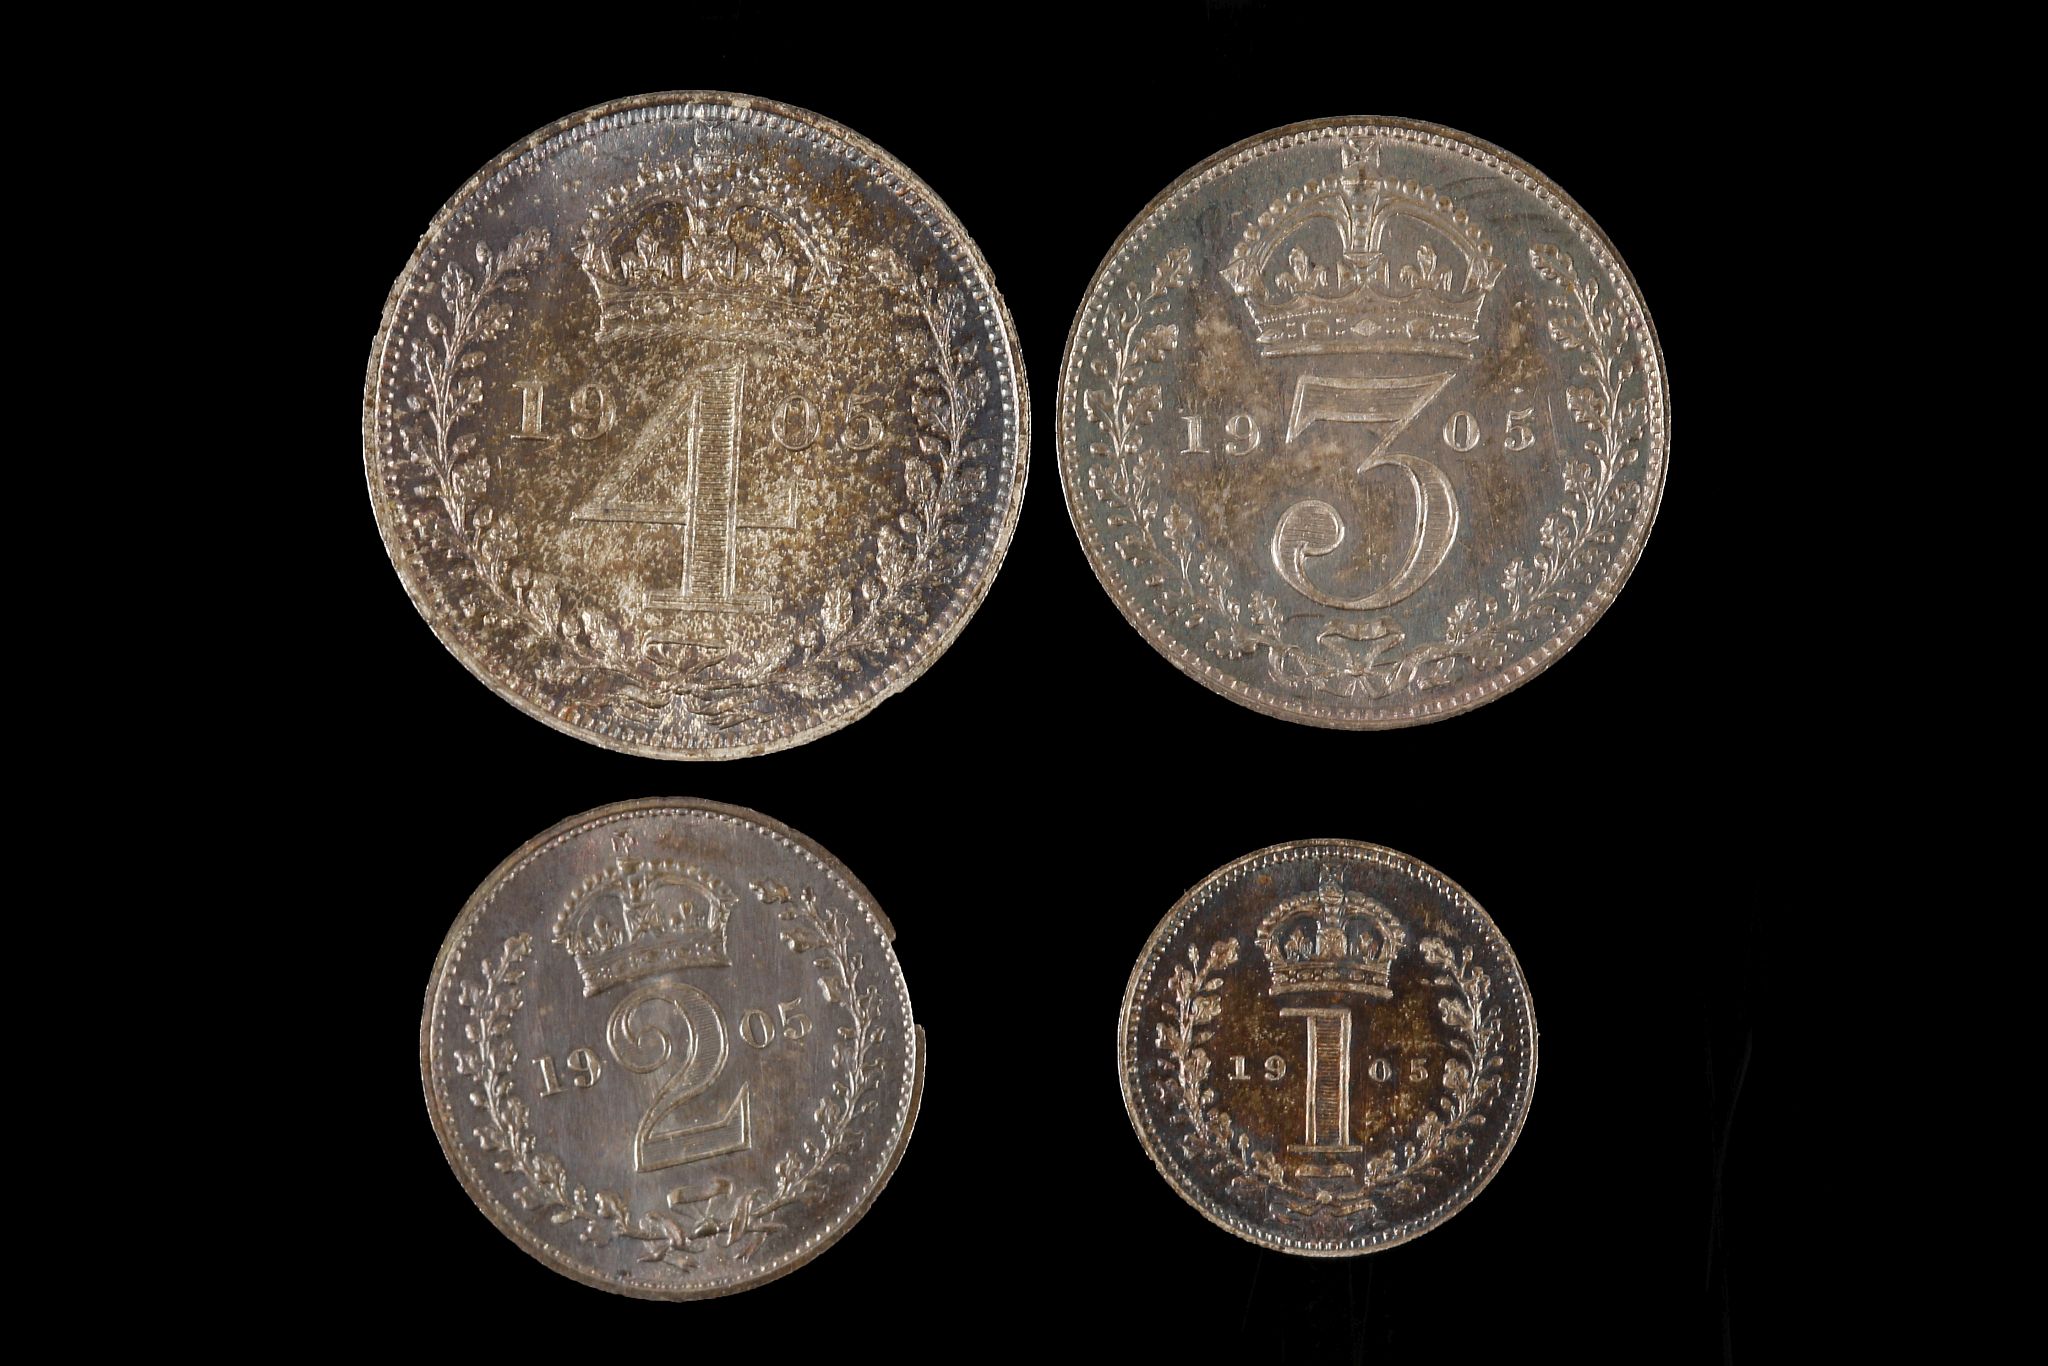 Edward VII 1905, maundy money set of four coins, bust right / Arabic values beneath crown within